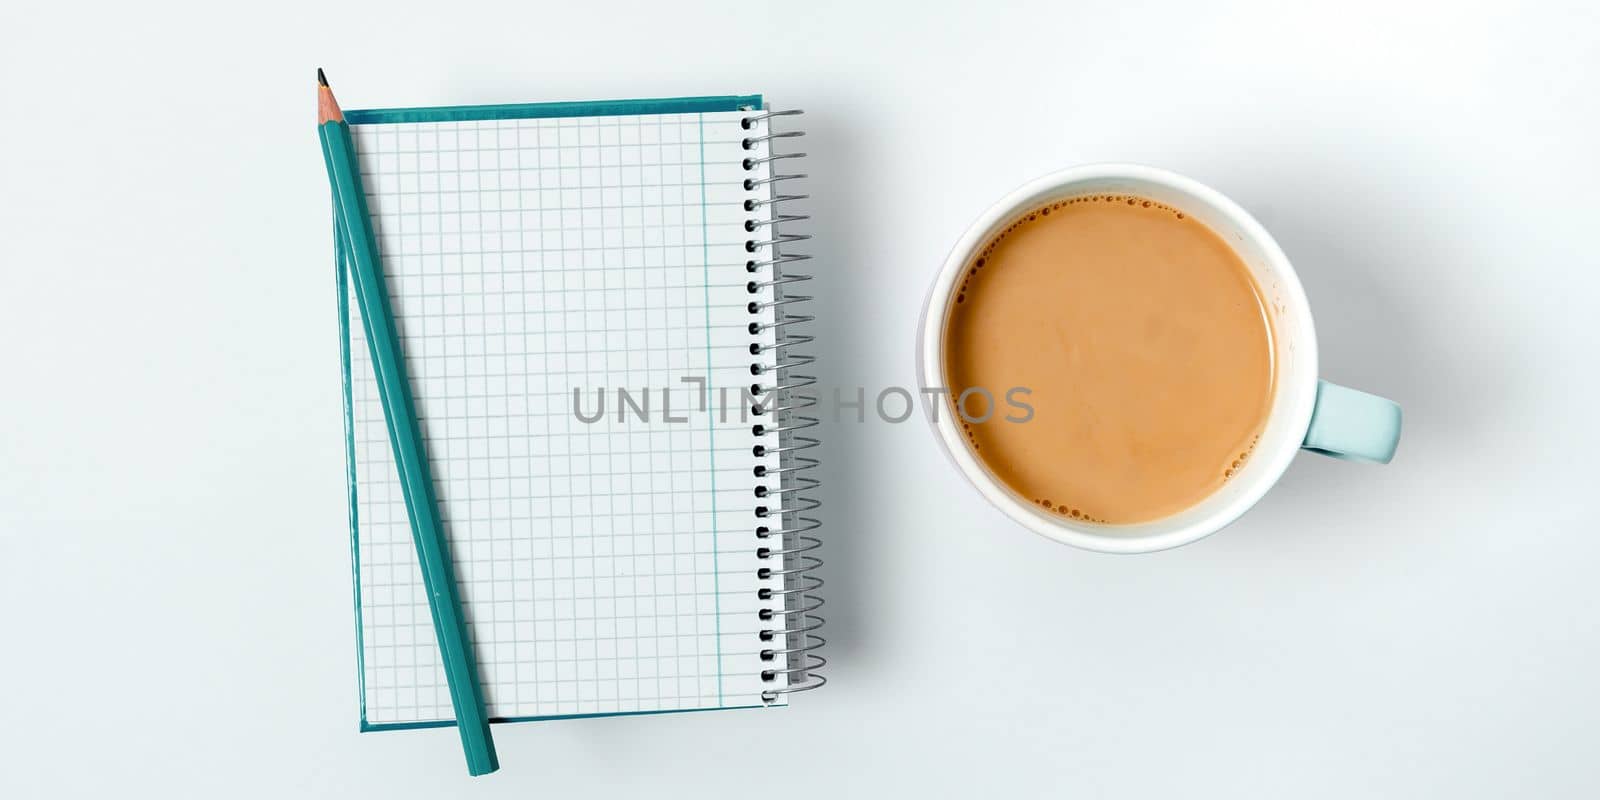 Coffee Cup Standing on Desk. Important infrormation written on paper. Different Office Supplies, Pencils, Pens, Marckers. Computer keyboard. Text on wood table. by nialowwa